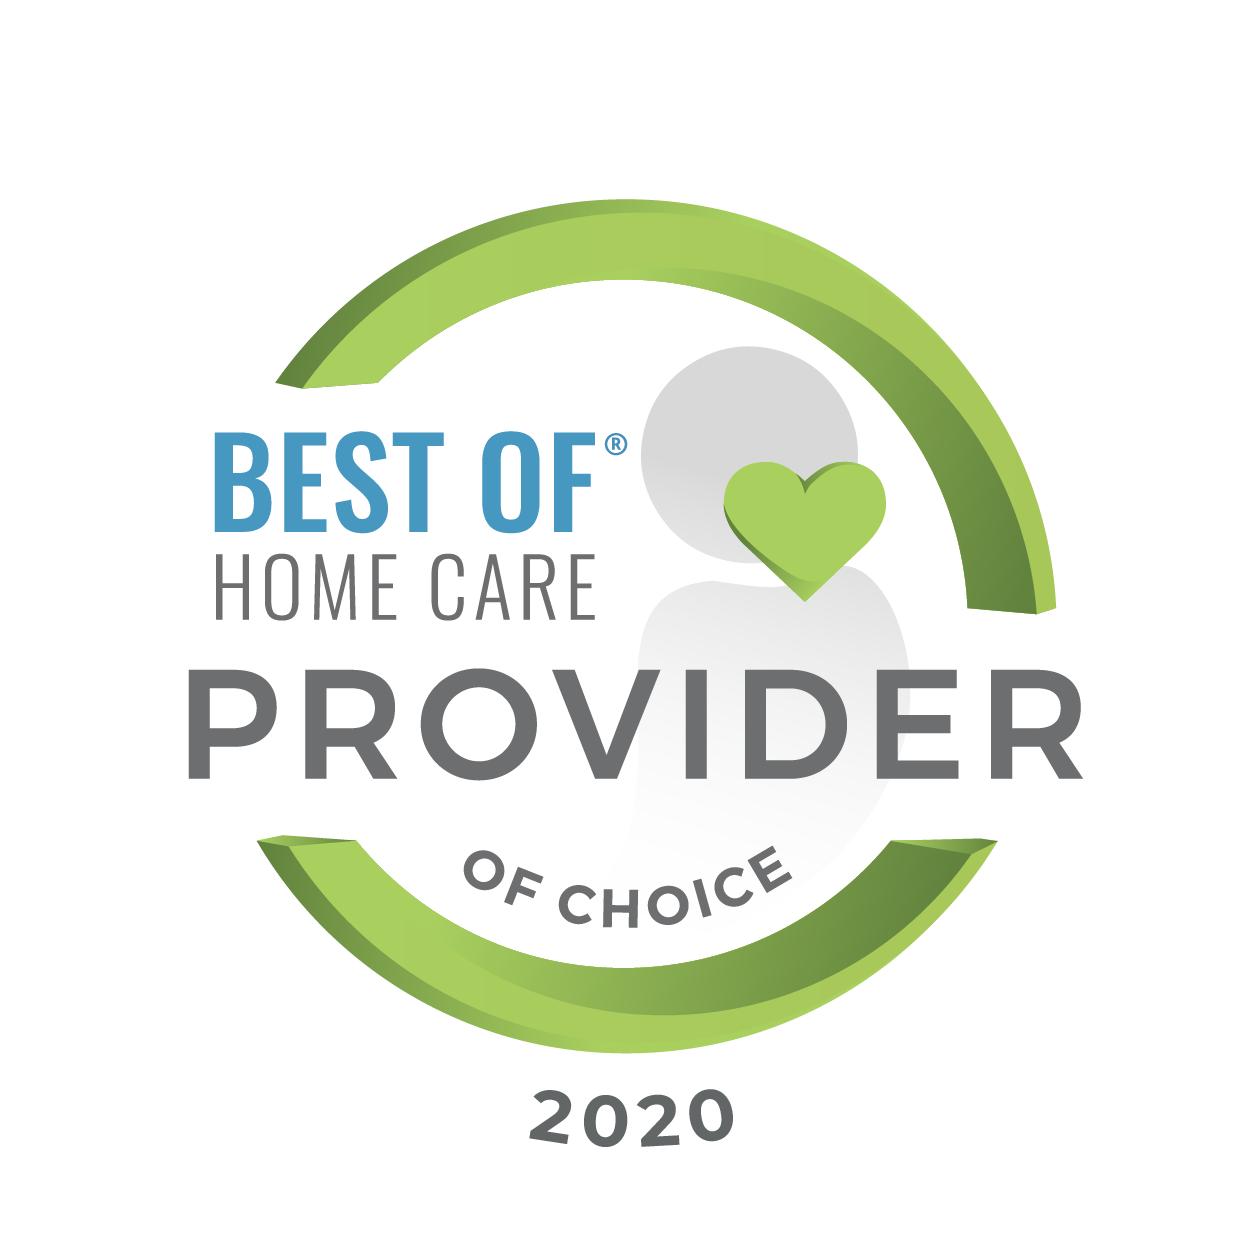 Home Care Pulse - Best of Home Care Provider of Choice Award 2020